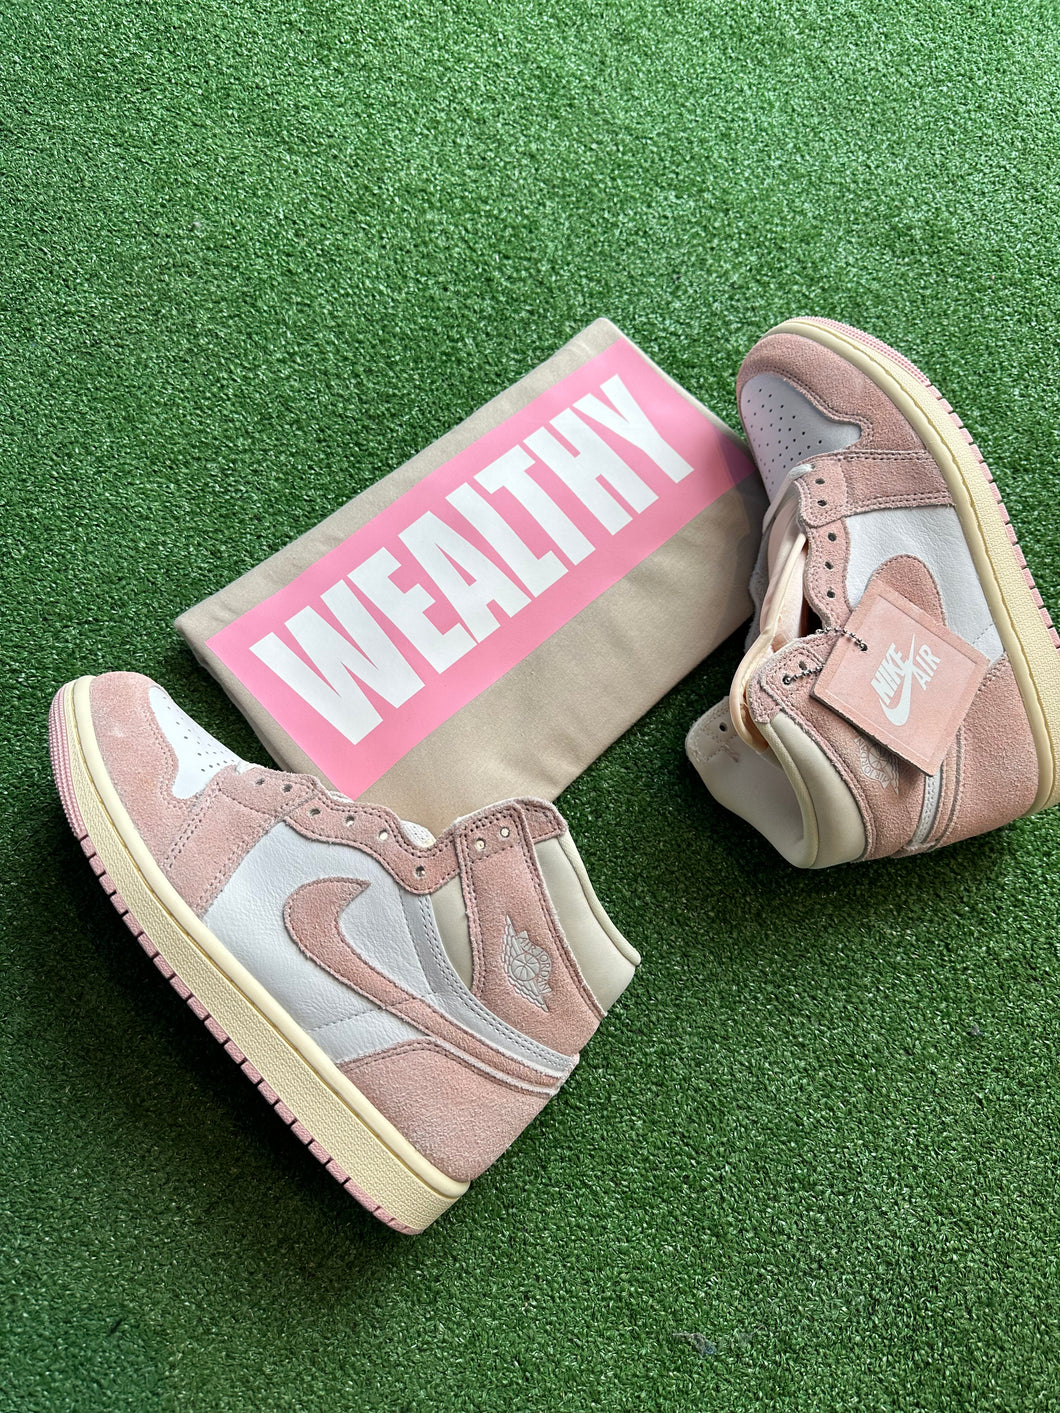 Wealthy Tee (Tan/Pink/White)